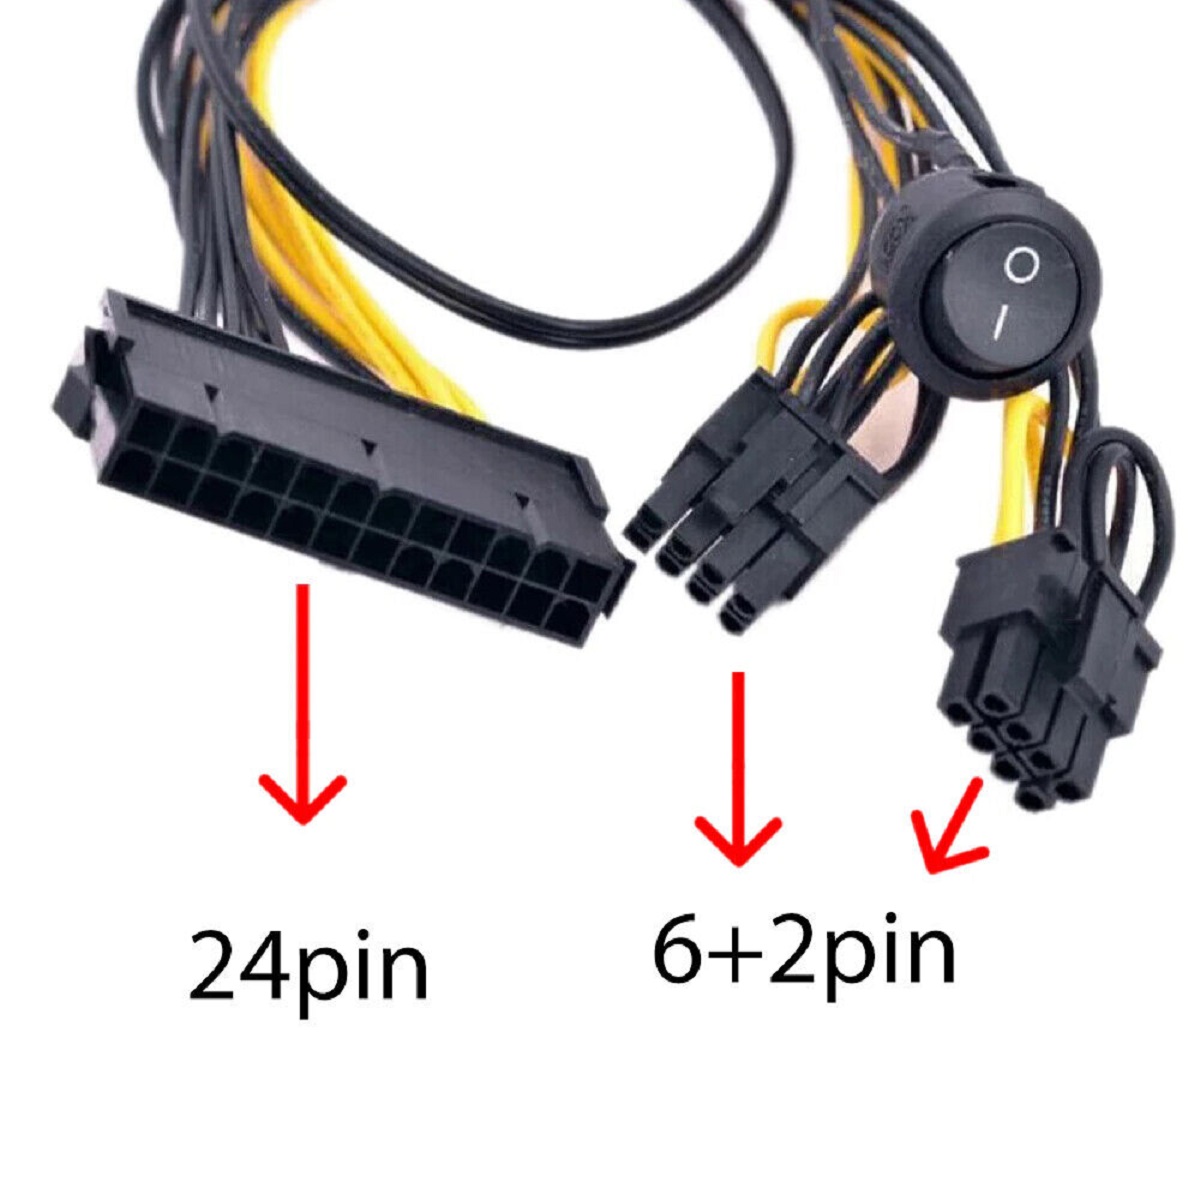 What Is PSU With 8(6+2)Pin Vs 24Pin